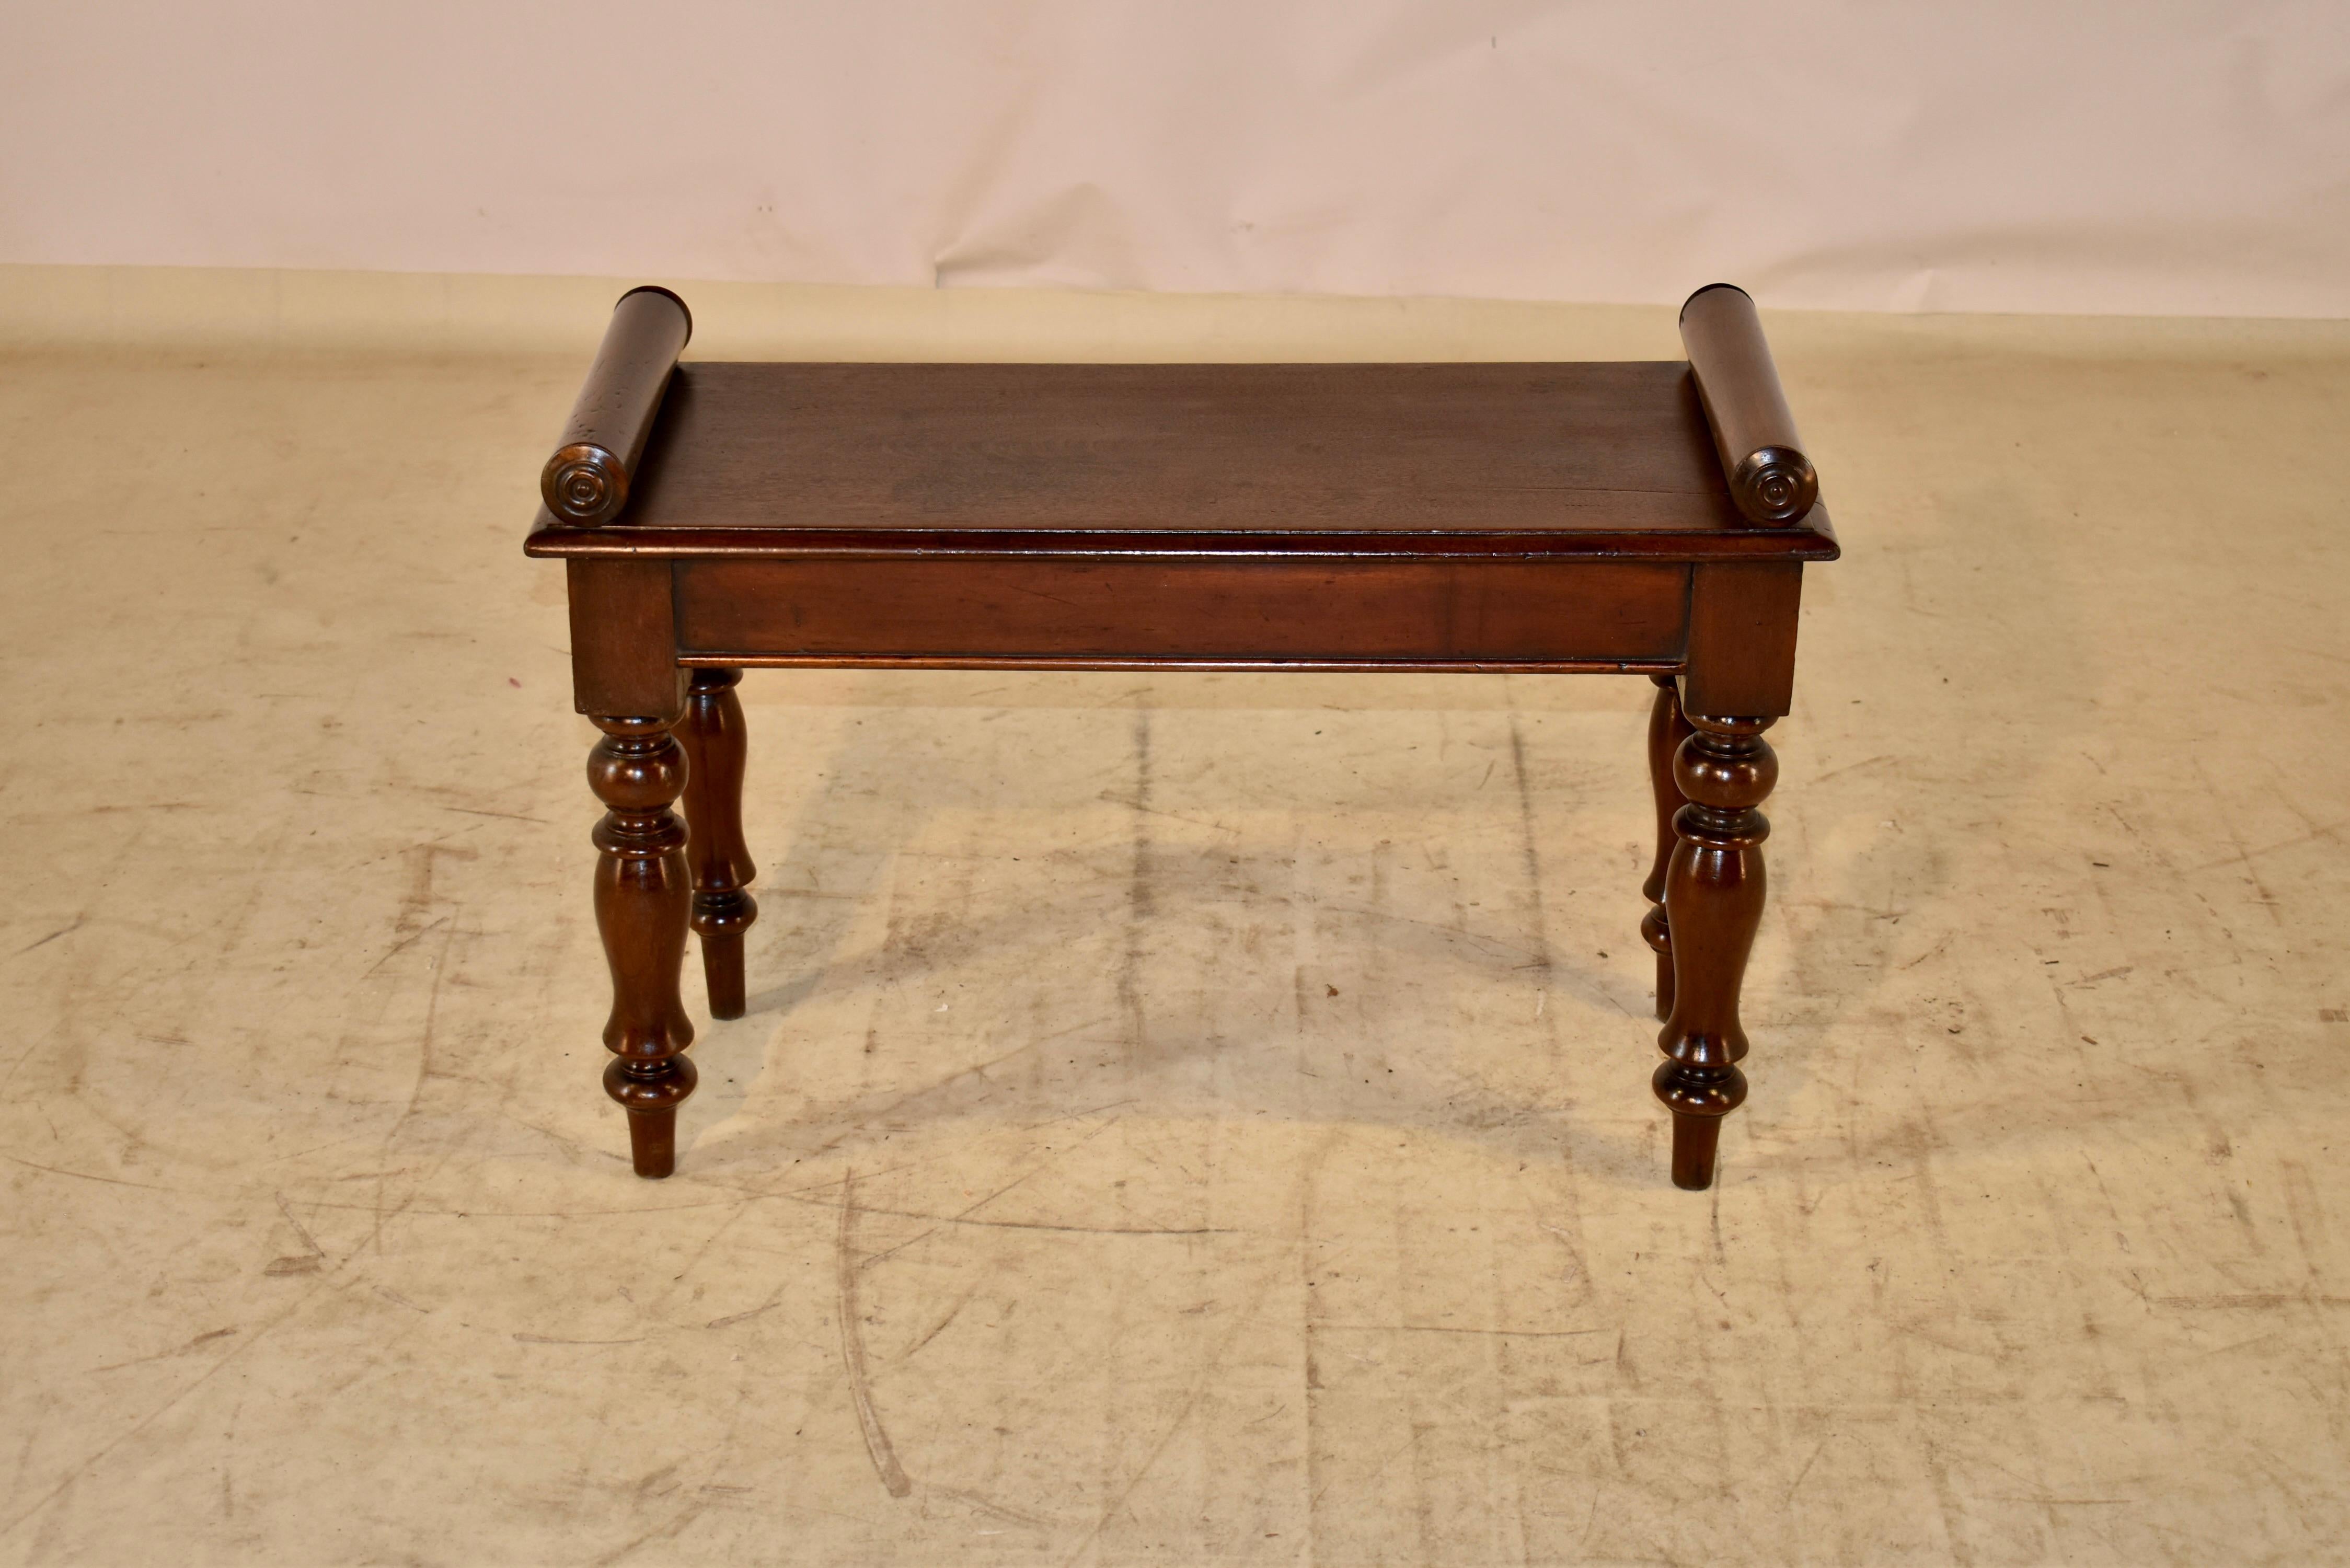 19th century mahogany window seat or small bench from England. The piece has lovely rolled arms applied to the top of the seat, which is made from a single plank and has a beveled edge. The apron is simple and has a beaded edge, and the bench is